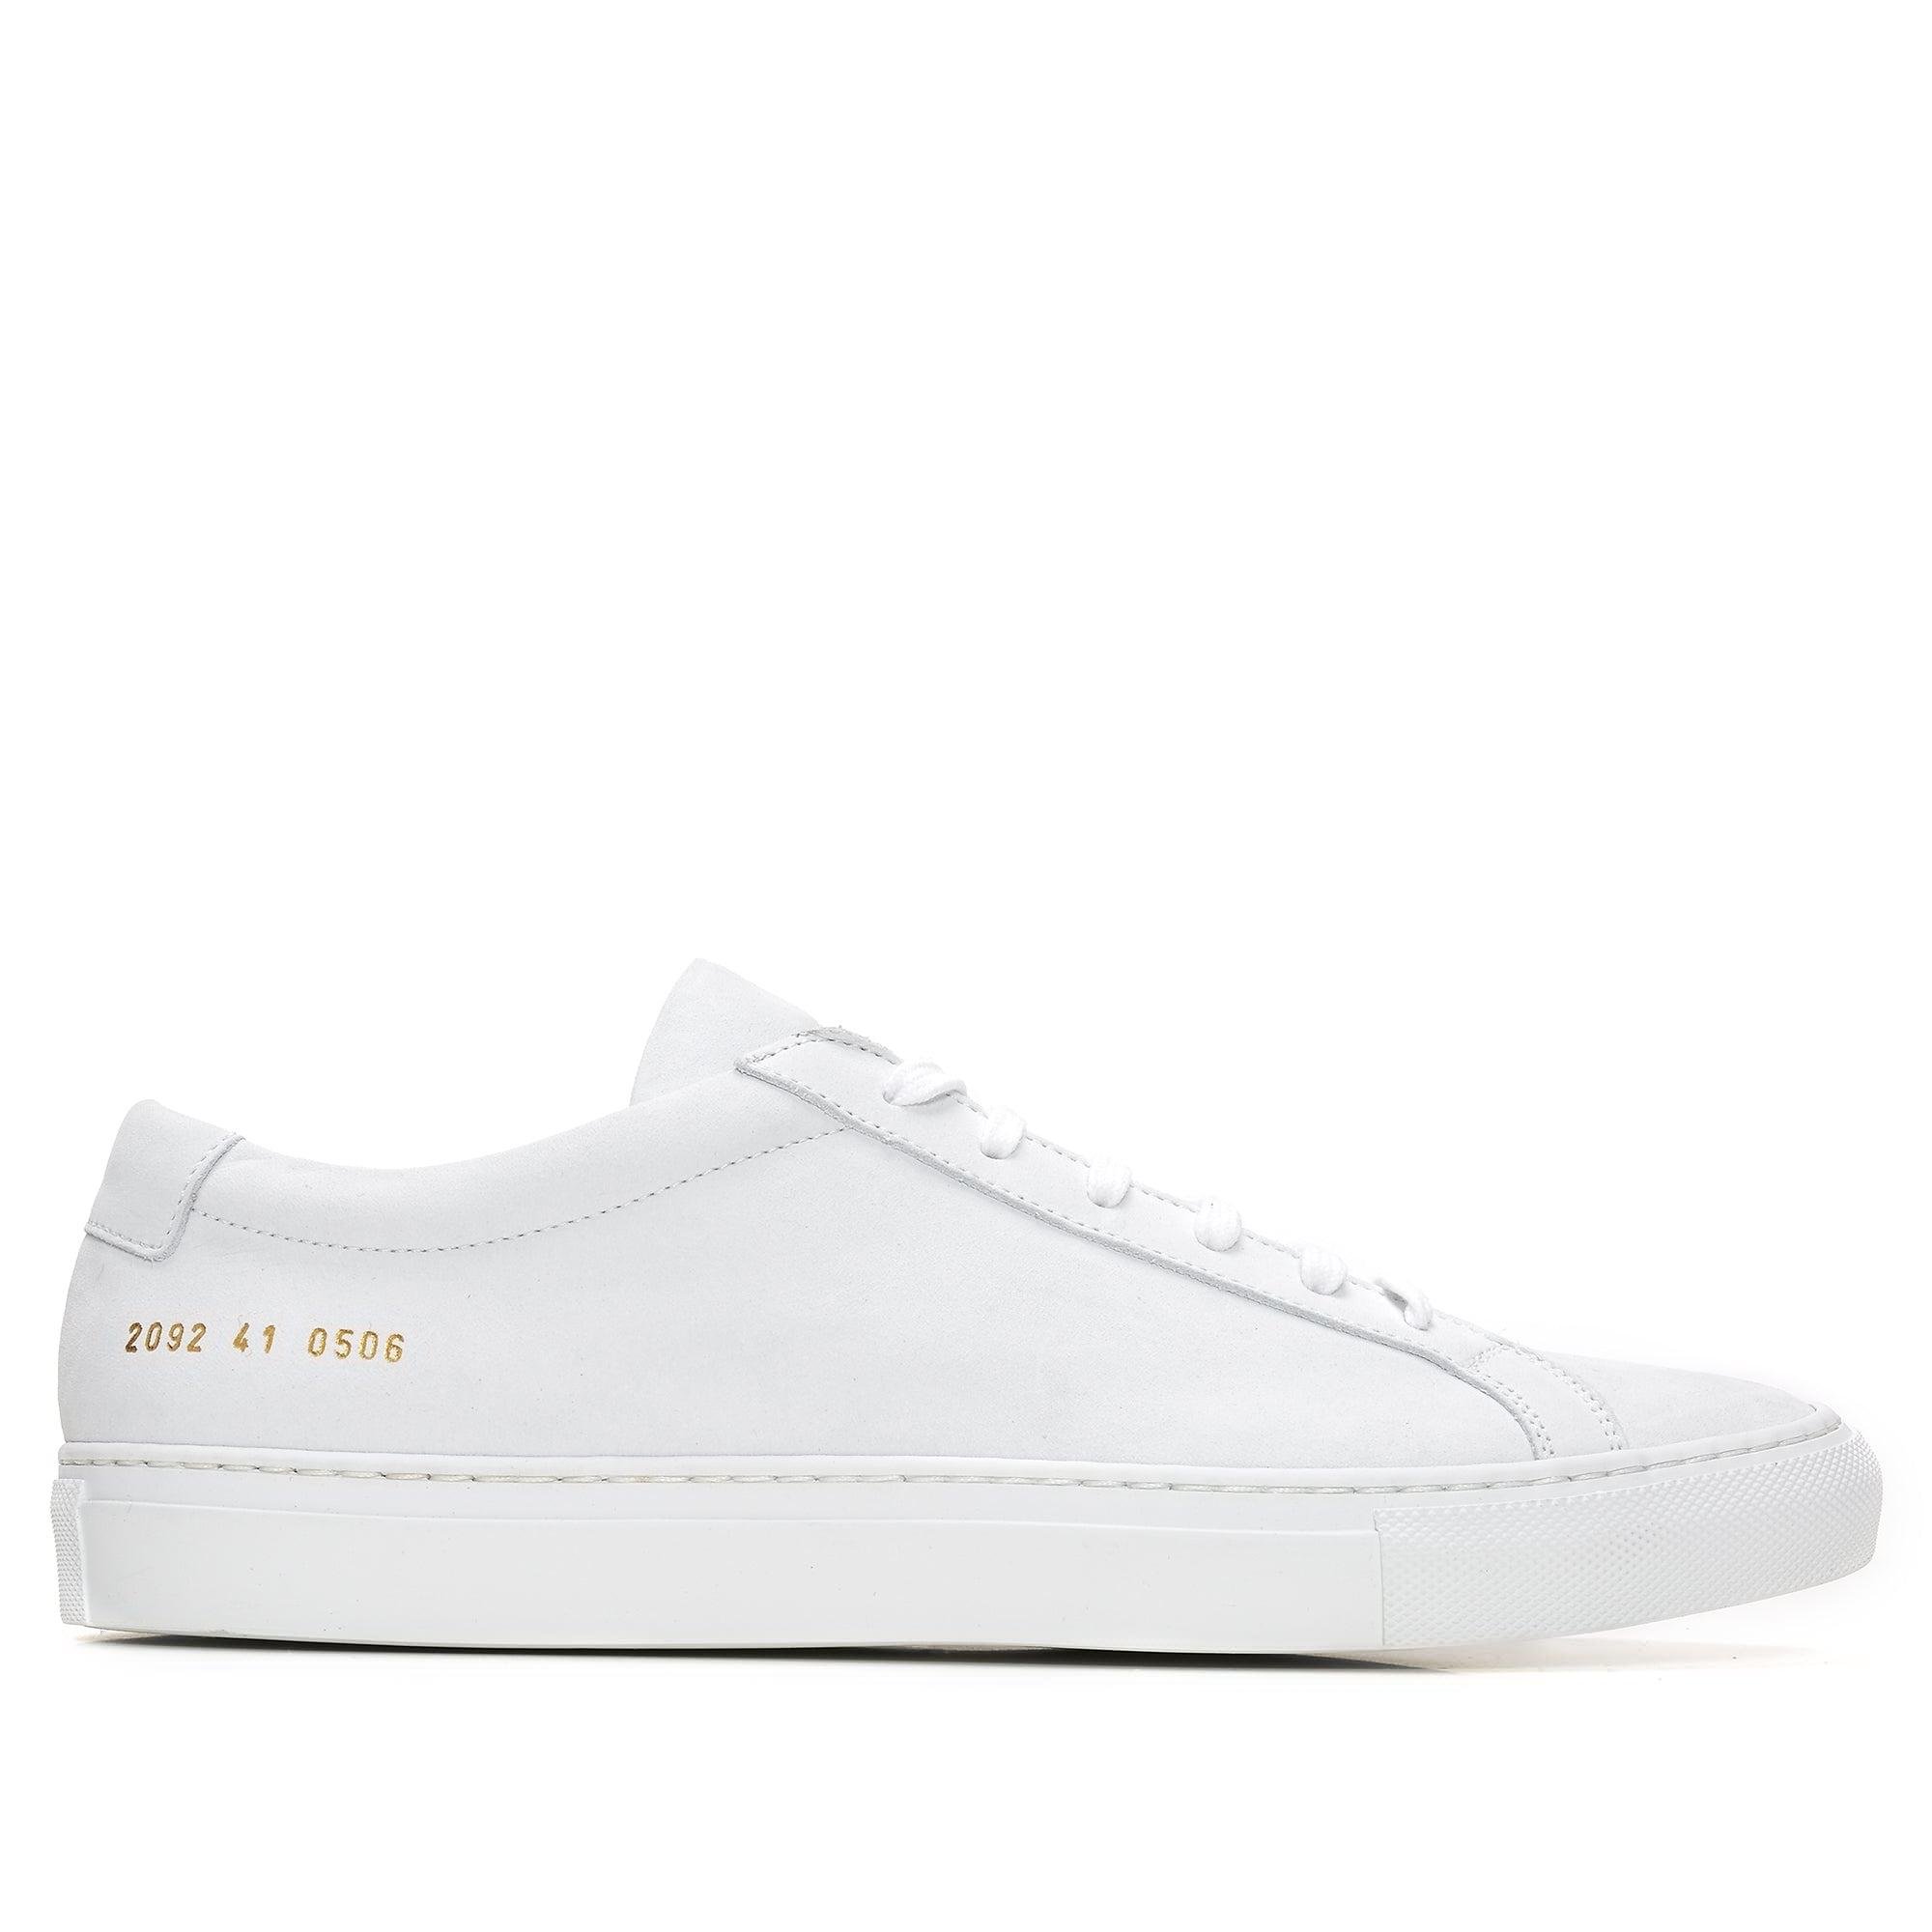 Common Projects - Original Achilles Low Sneakers - (White) by COMMON PROJECTS